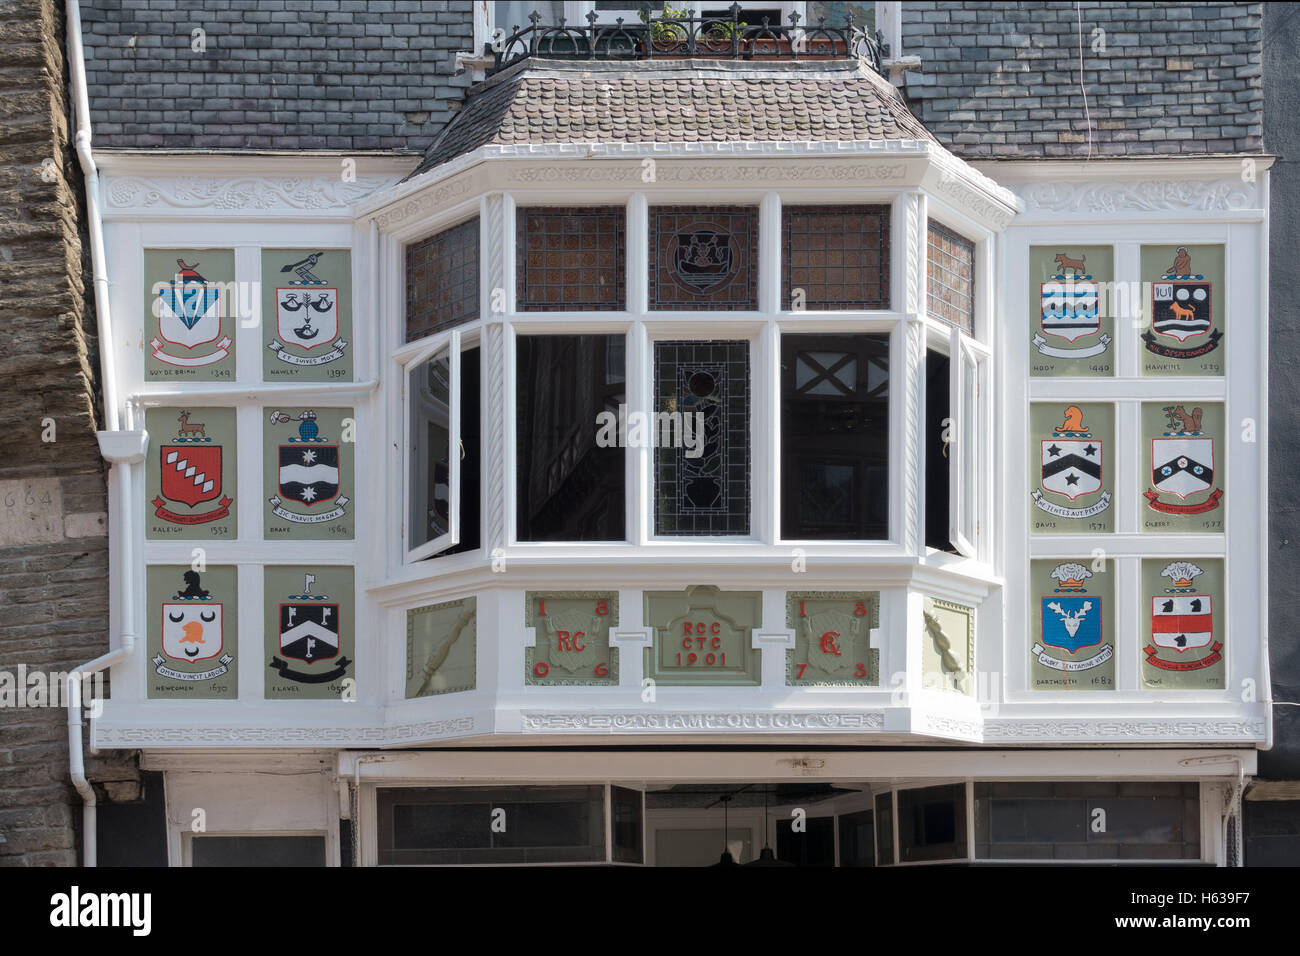 Colourful coats of arms surround this old bay window in Dartmouth, Devon UK Stock Photo